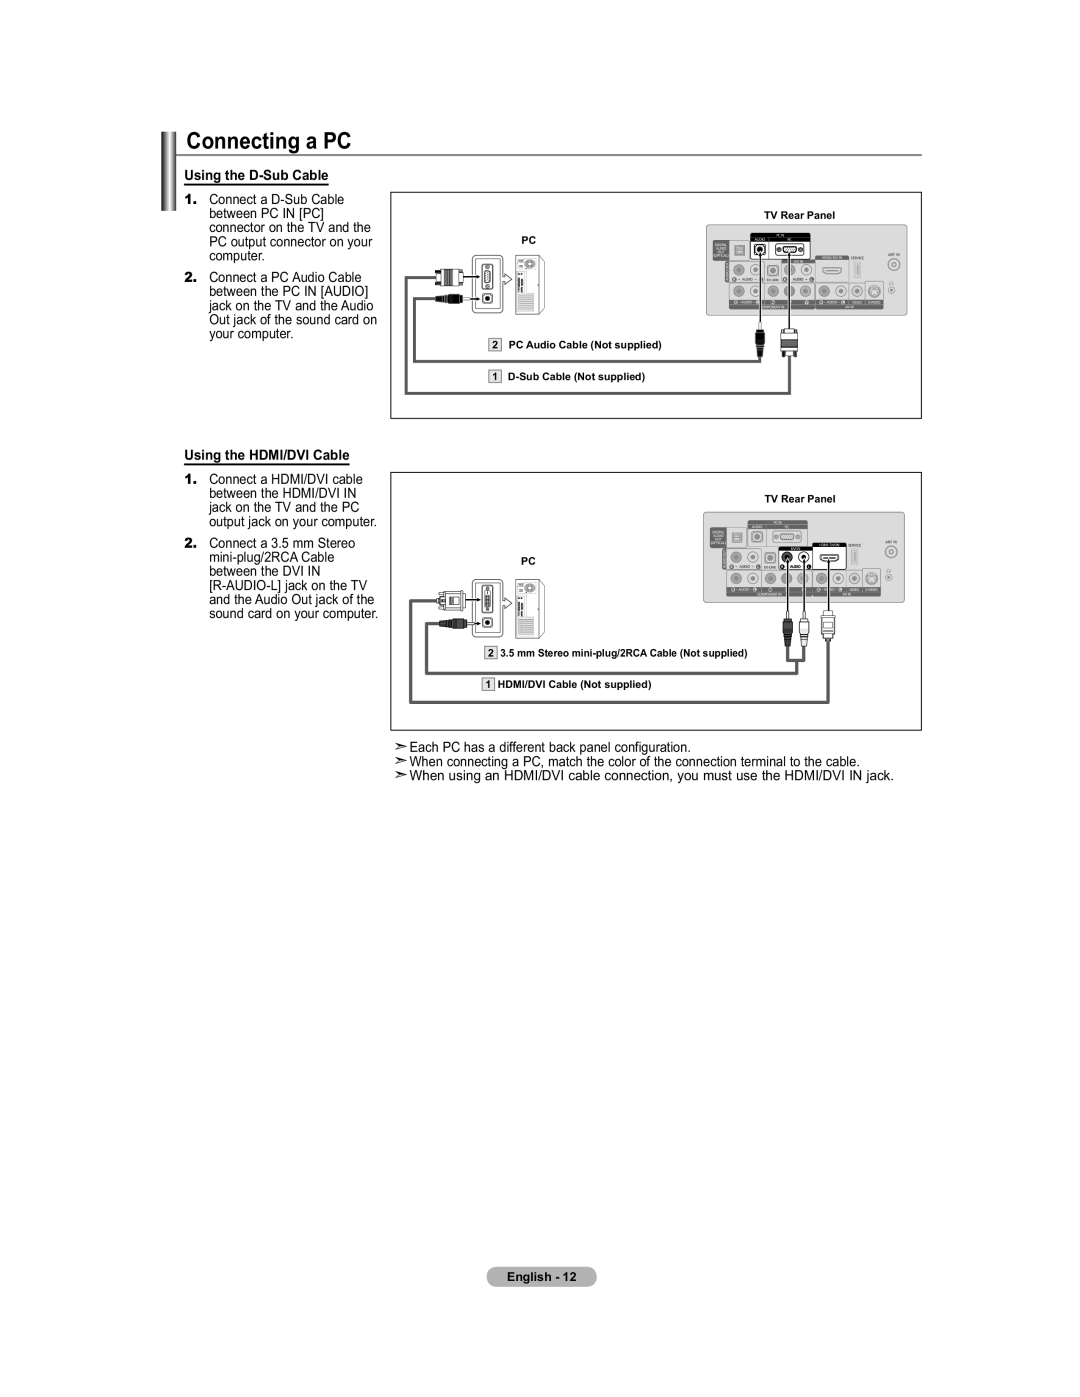 Samsung 451 user manual Connecting a PC, Using the D-Sub Cable, Using the HDMI/DVI Cable 